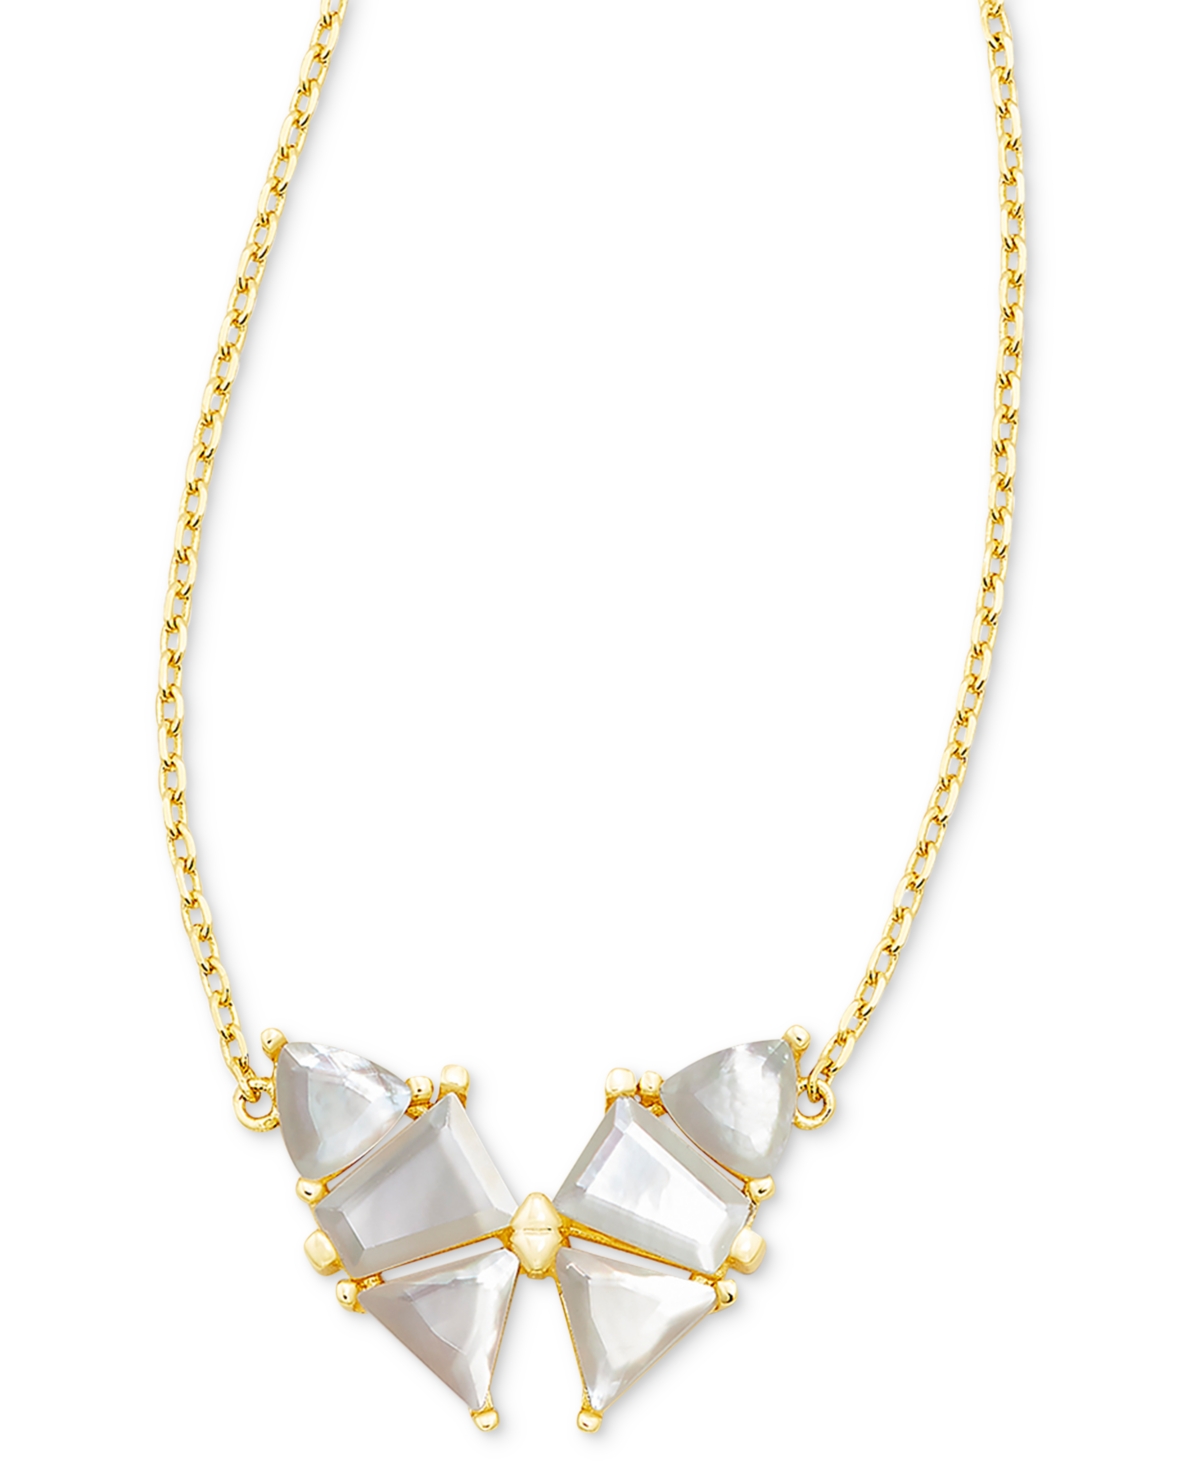 Kendra Scott 14k Gold-plated Mixed Crystal Butterfly Adjustable Pendant Necklace, 16" + 3" Extender In Ivory Mother Of Pearl